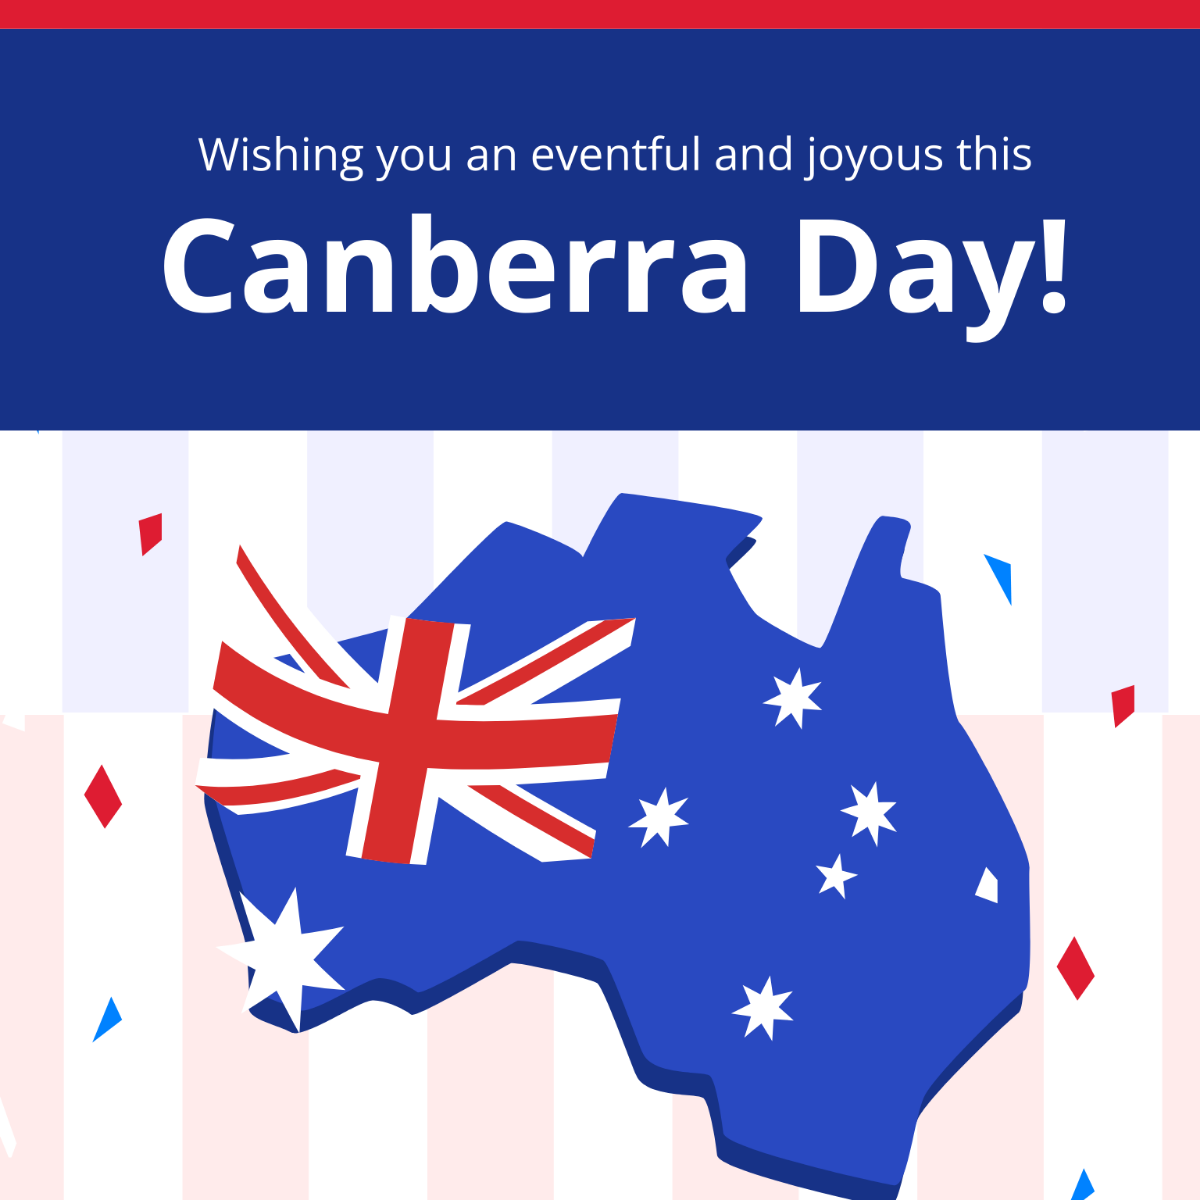 Canberra Day Wishes Vector